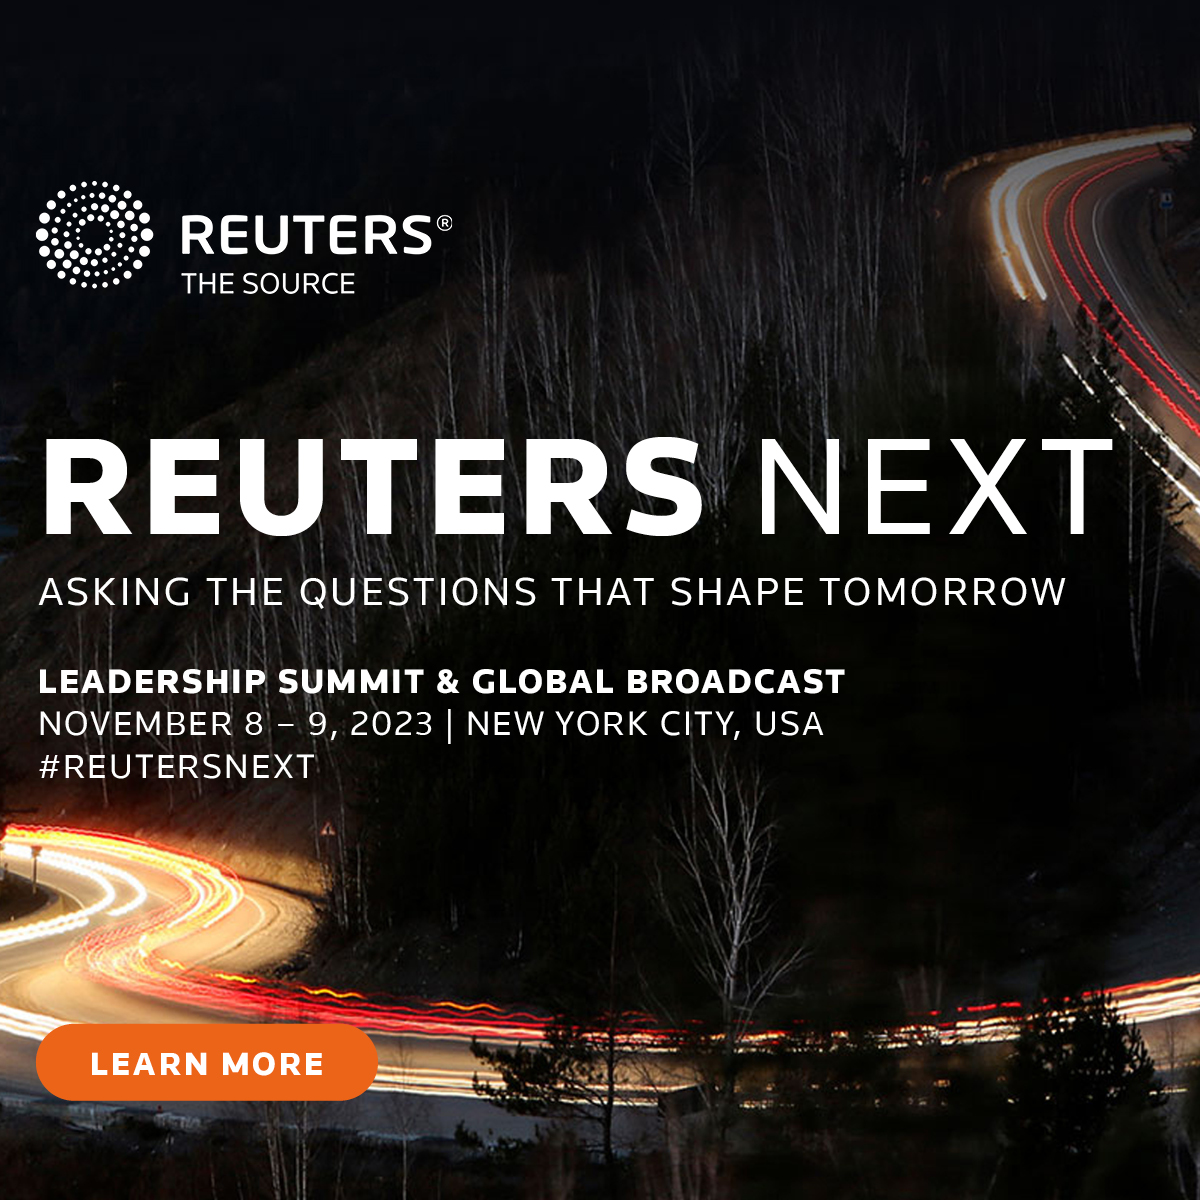 Reuters NEXT (Nov 8-9) is the definitive annual live journalism event, hosted by the world’s largest and most trusted news agency. At the heart of Reuters NEXT (Nov 8-9, NYC) is the World Stage. Check out the full speaker line up here events.reutersevents.com/next